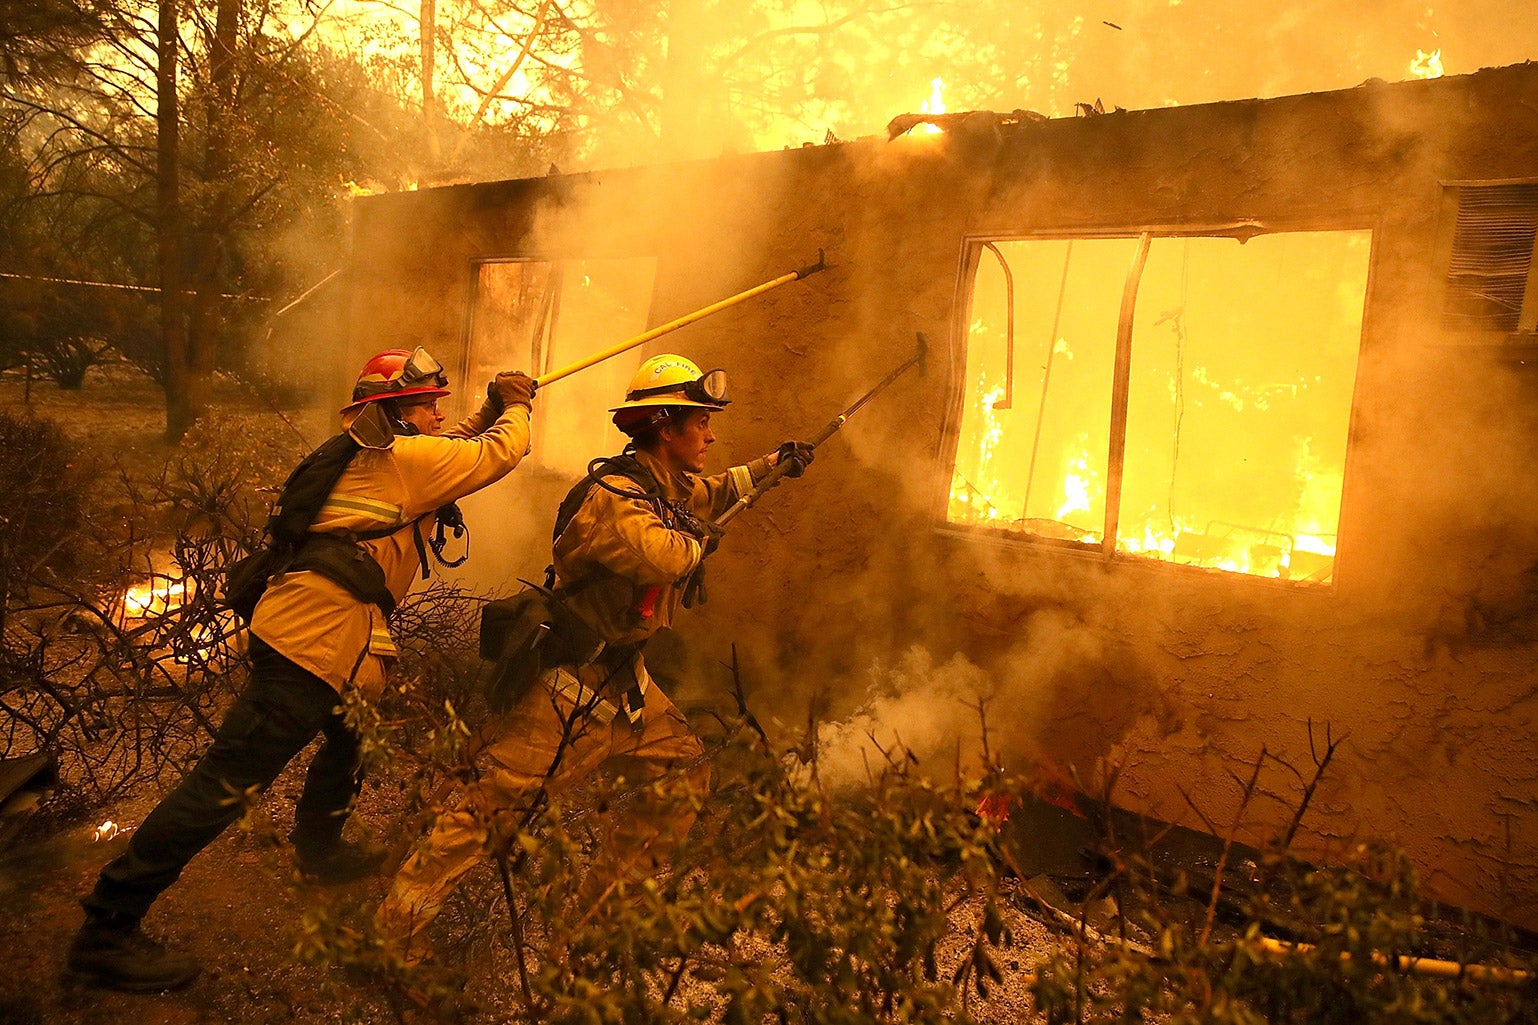 Firefighters try to contain a house on fire in California.